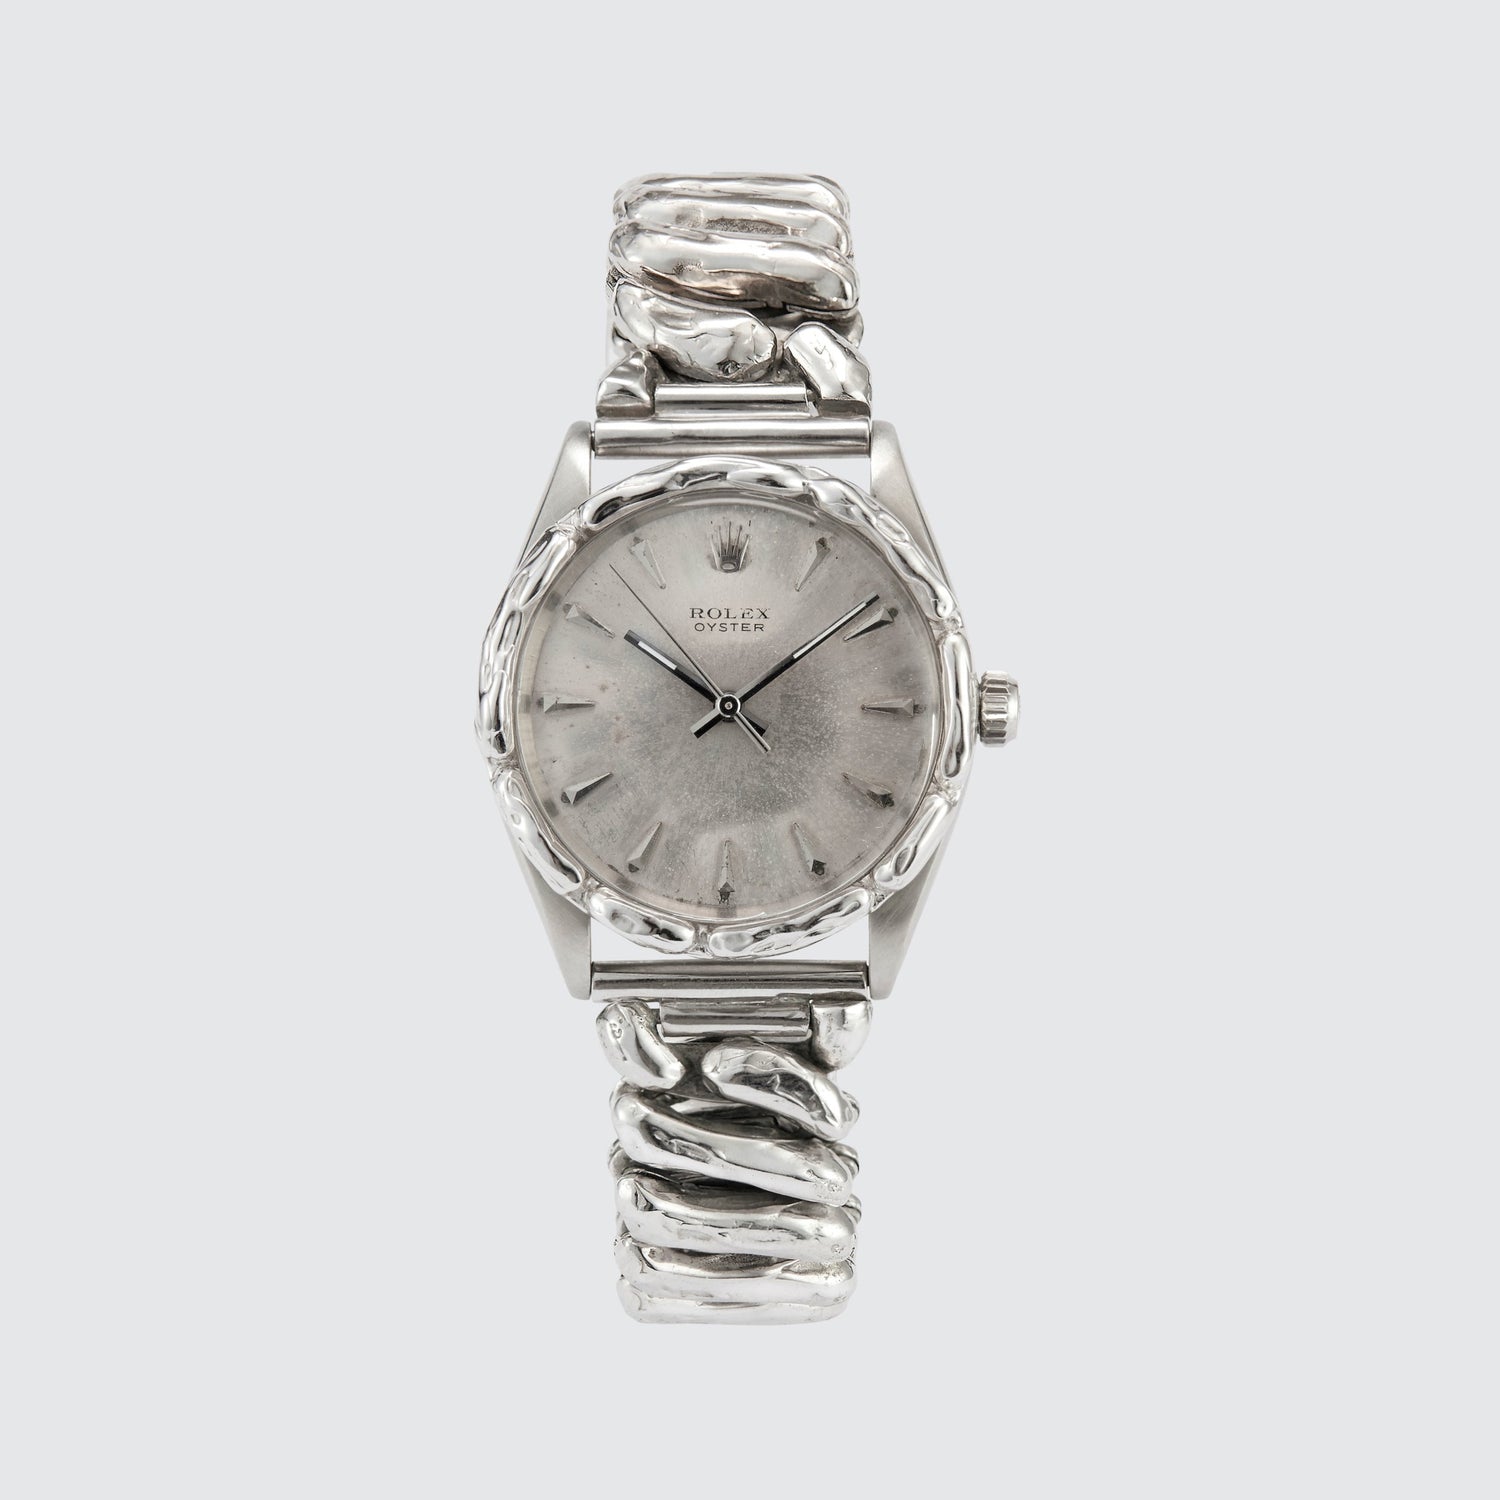 Customised Vintage Rolex Oyster Perpetual Watch